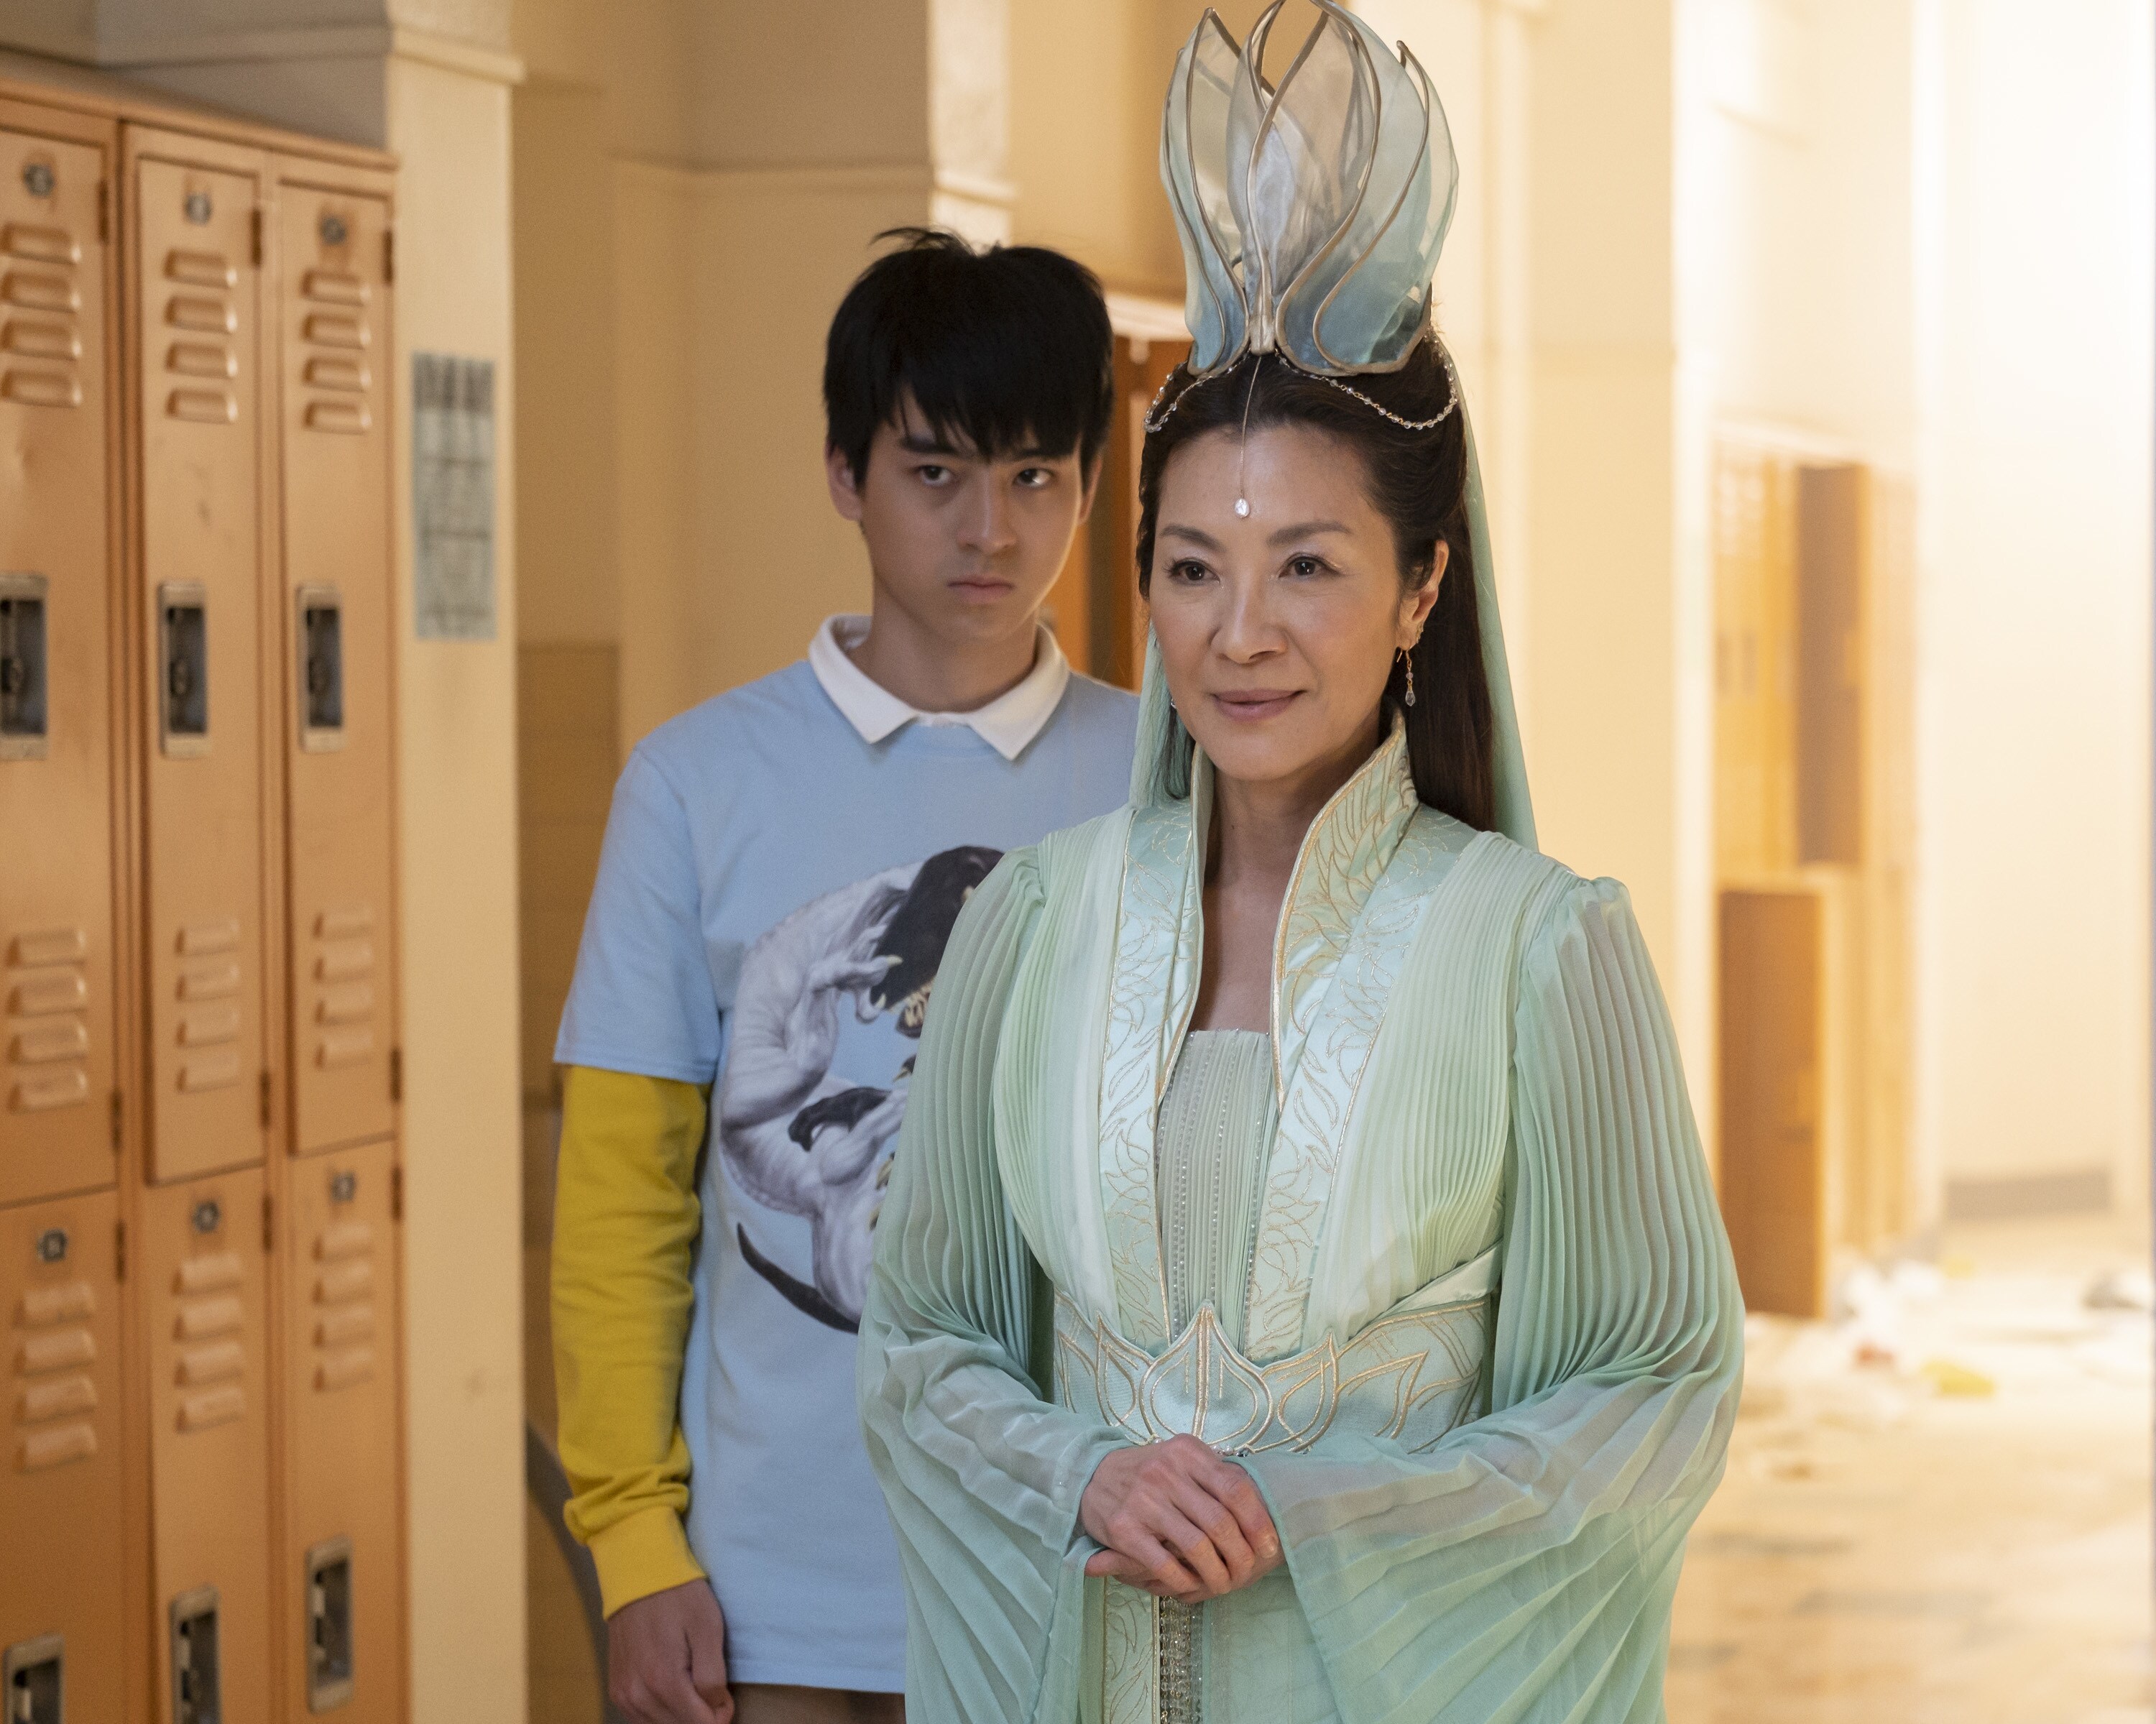 Guanyin (Michelle Yeoh), in a fantastical dress, stands in front of Wei-Chen (Jim Liu) in a high school hallway